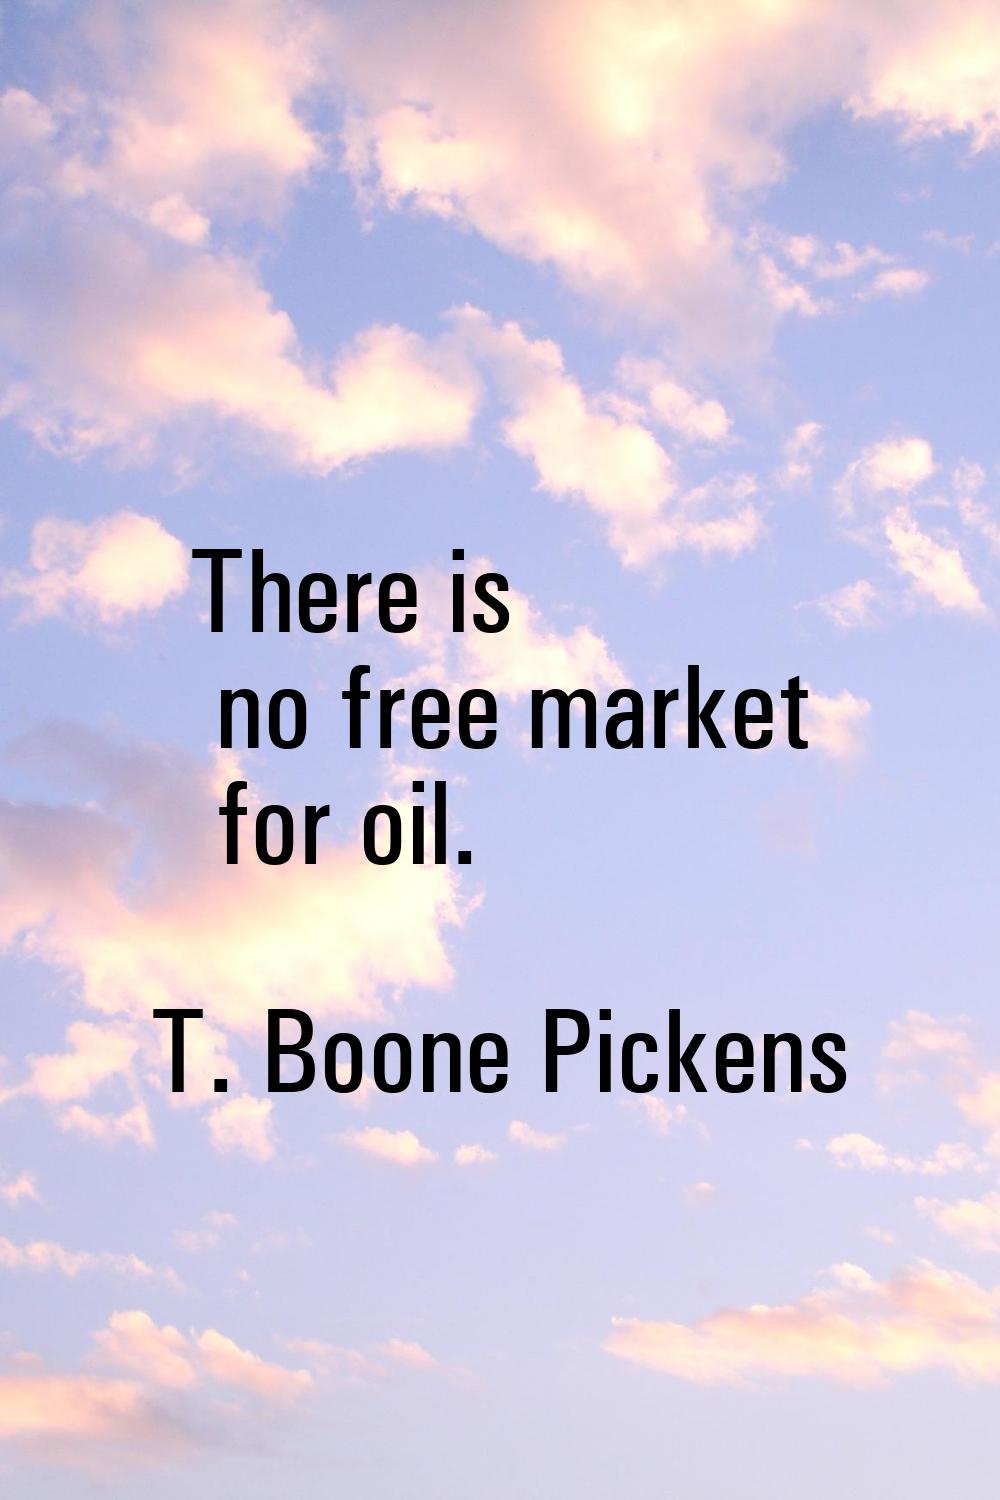 There is no free market for oil.